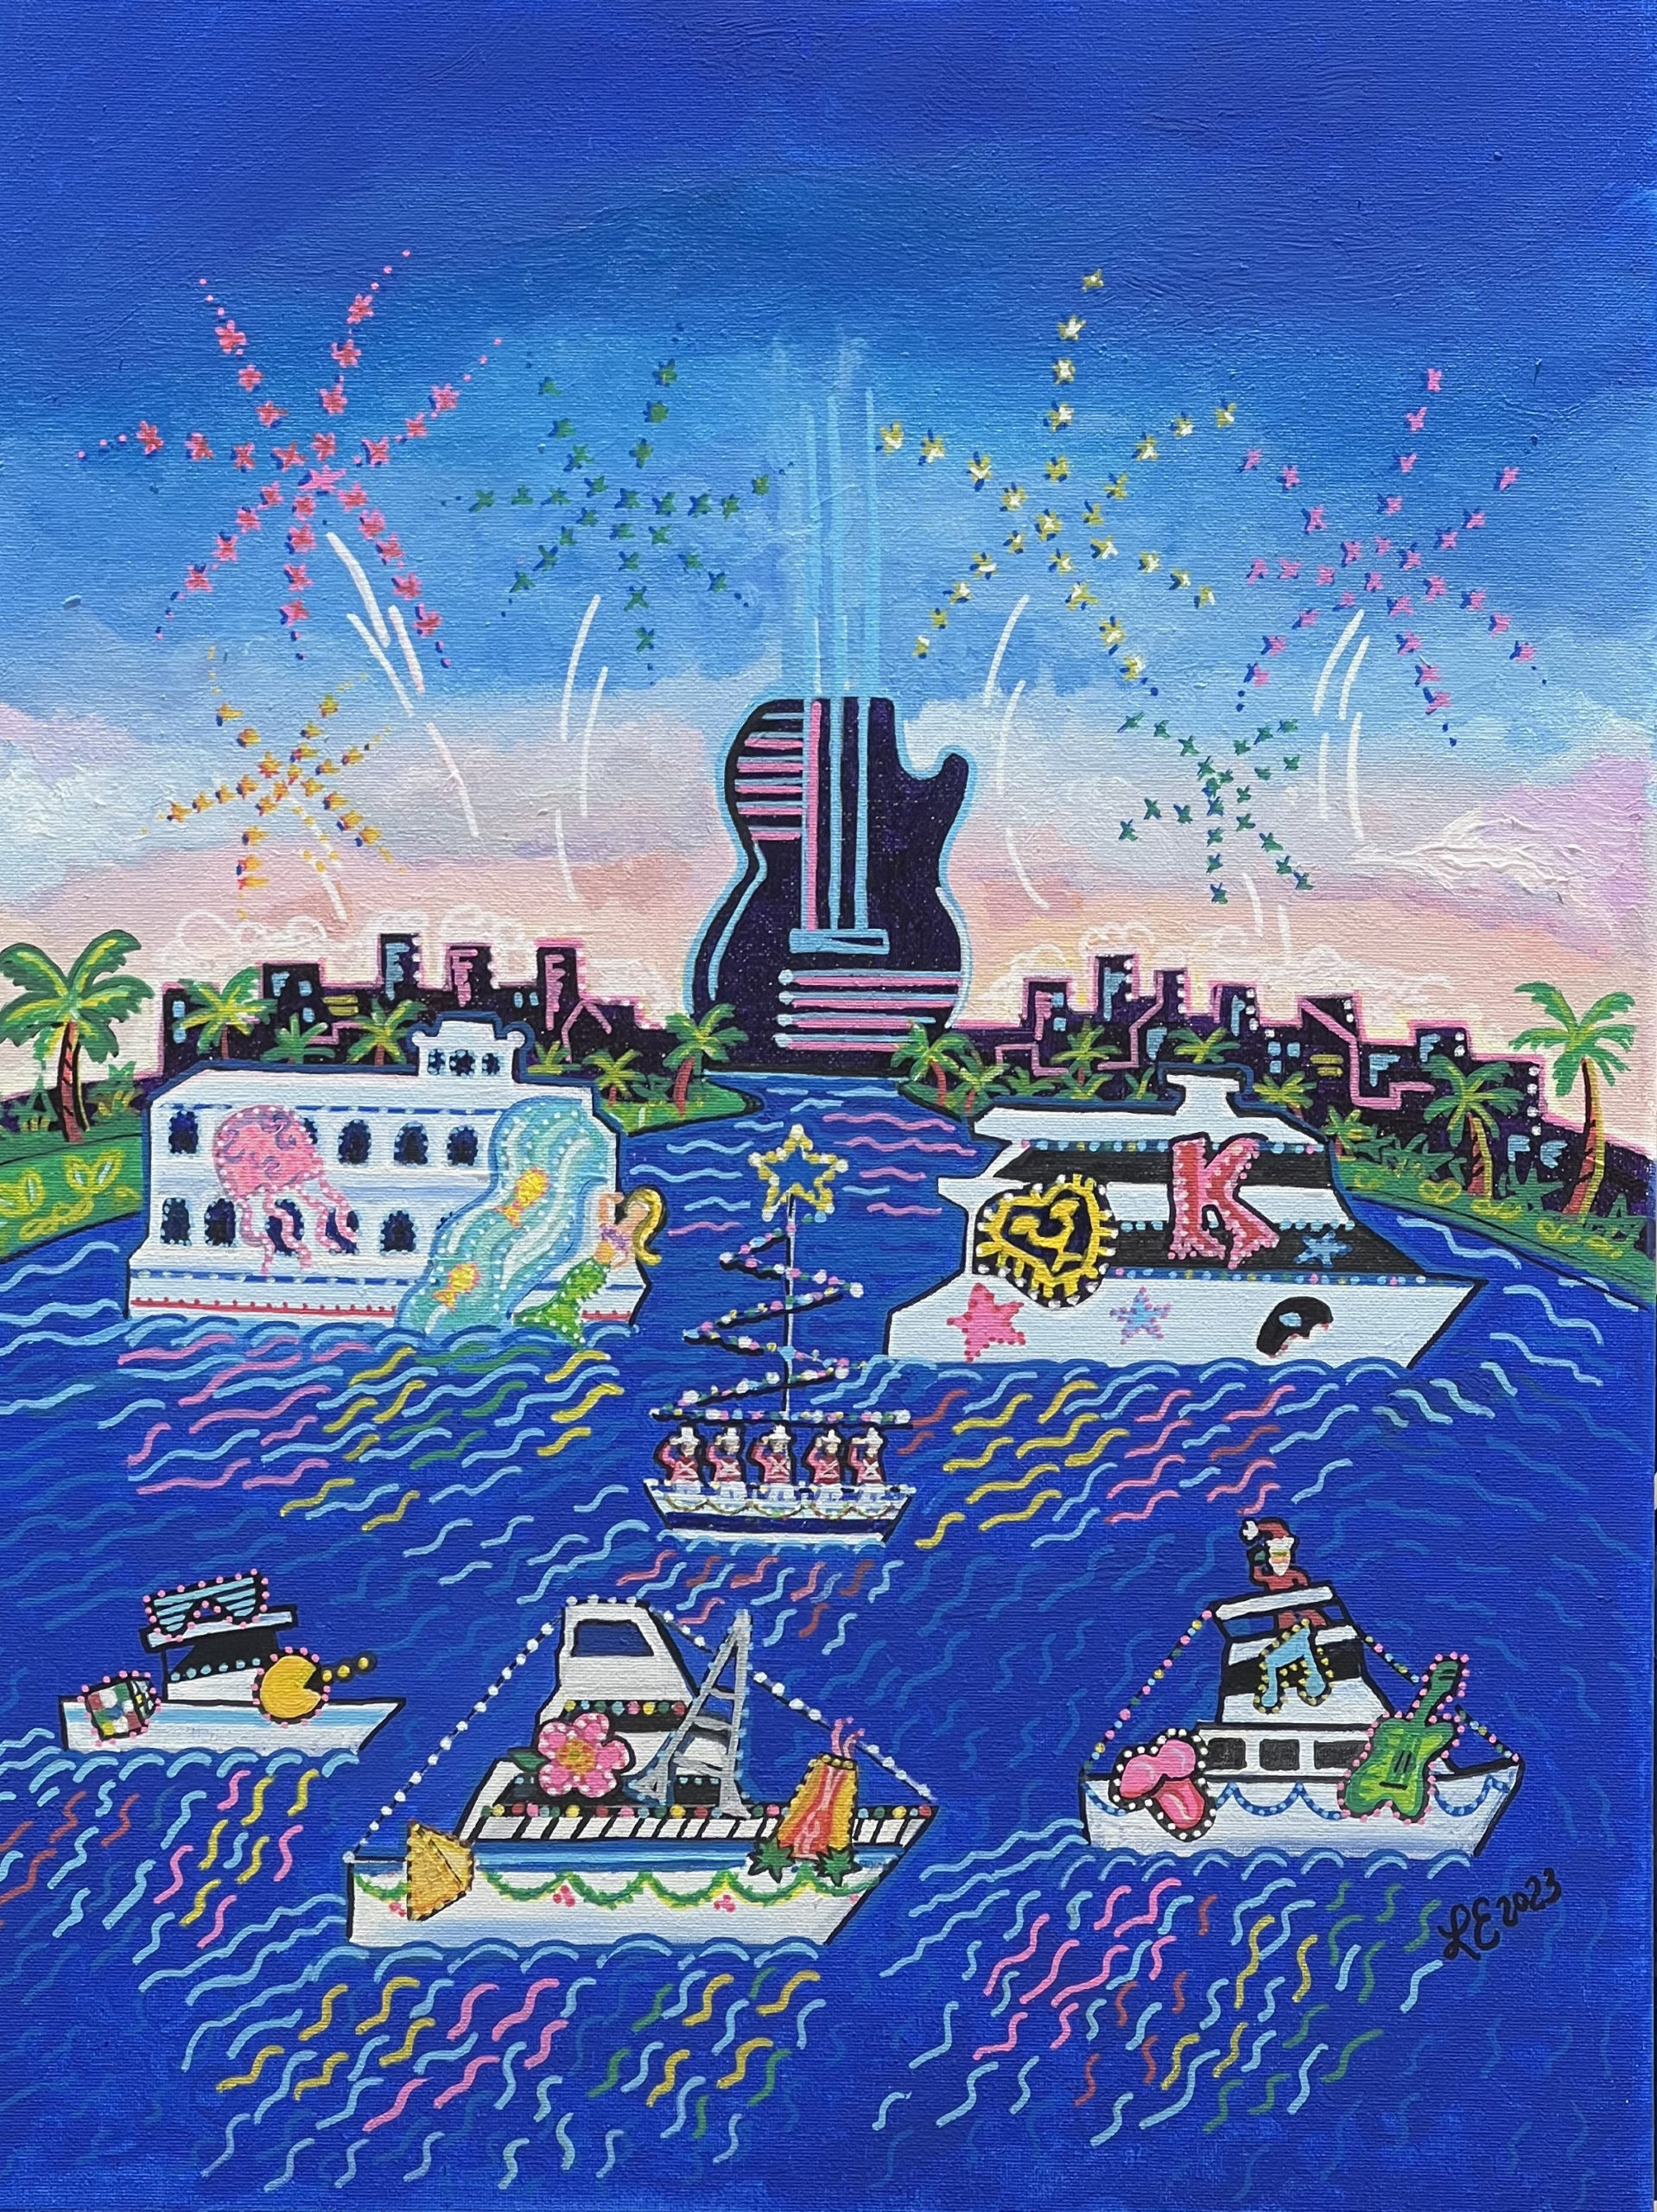 2023 Winterfest Painting REFLECTION by poster artist Laura Elmore